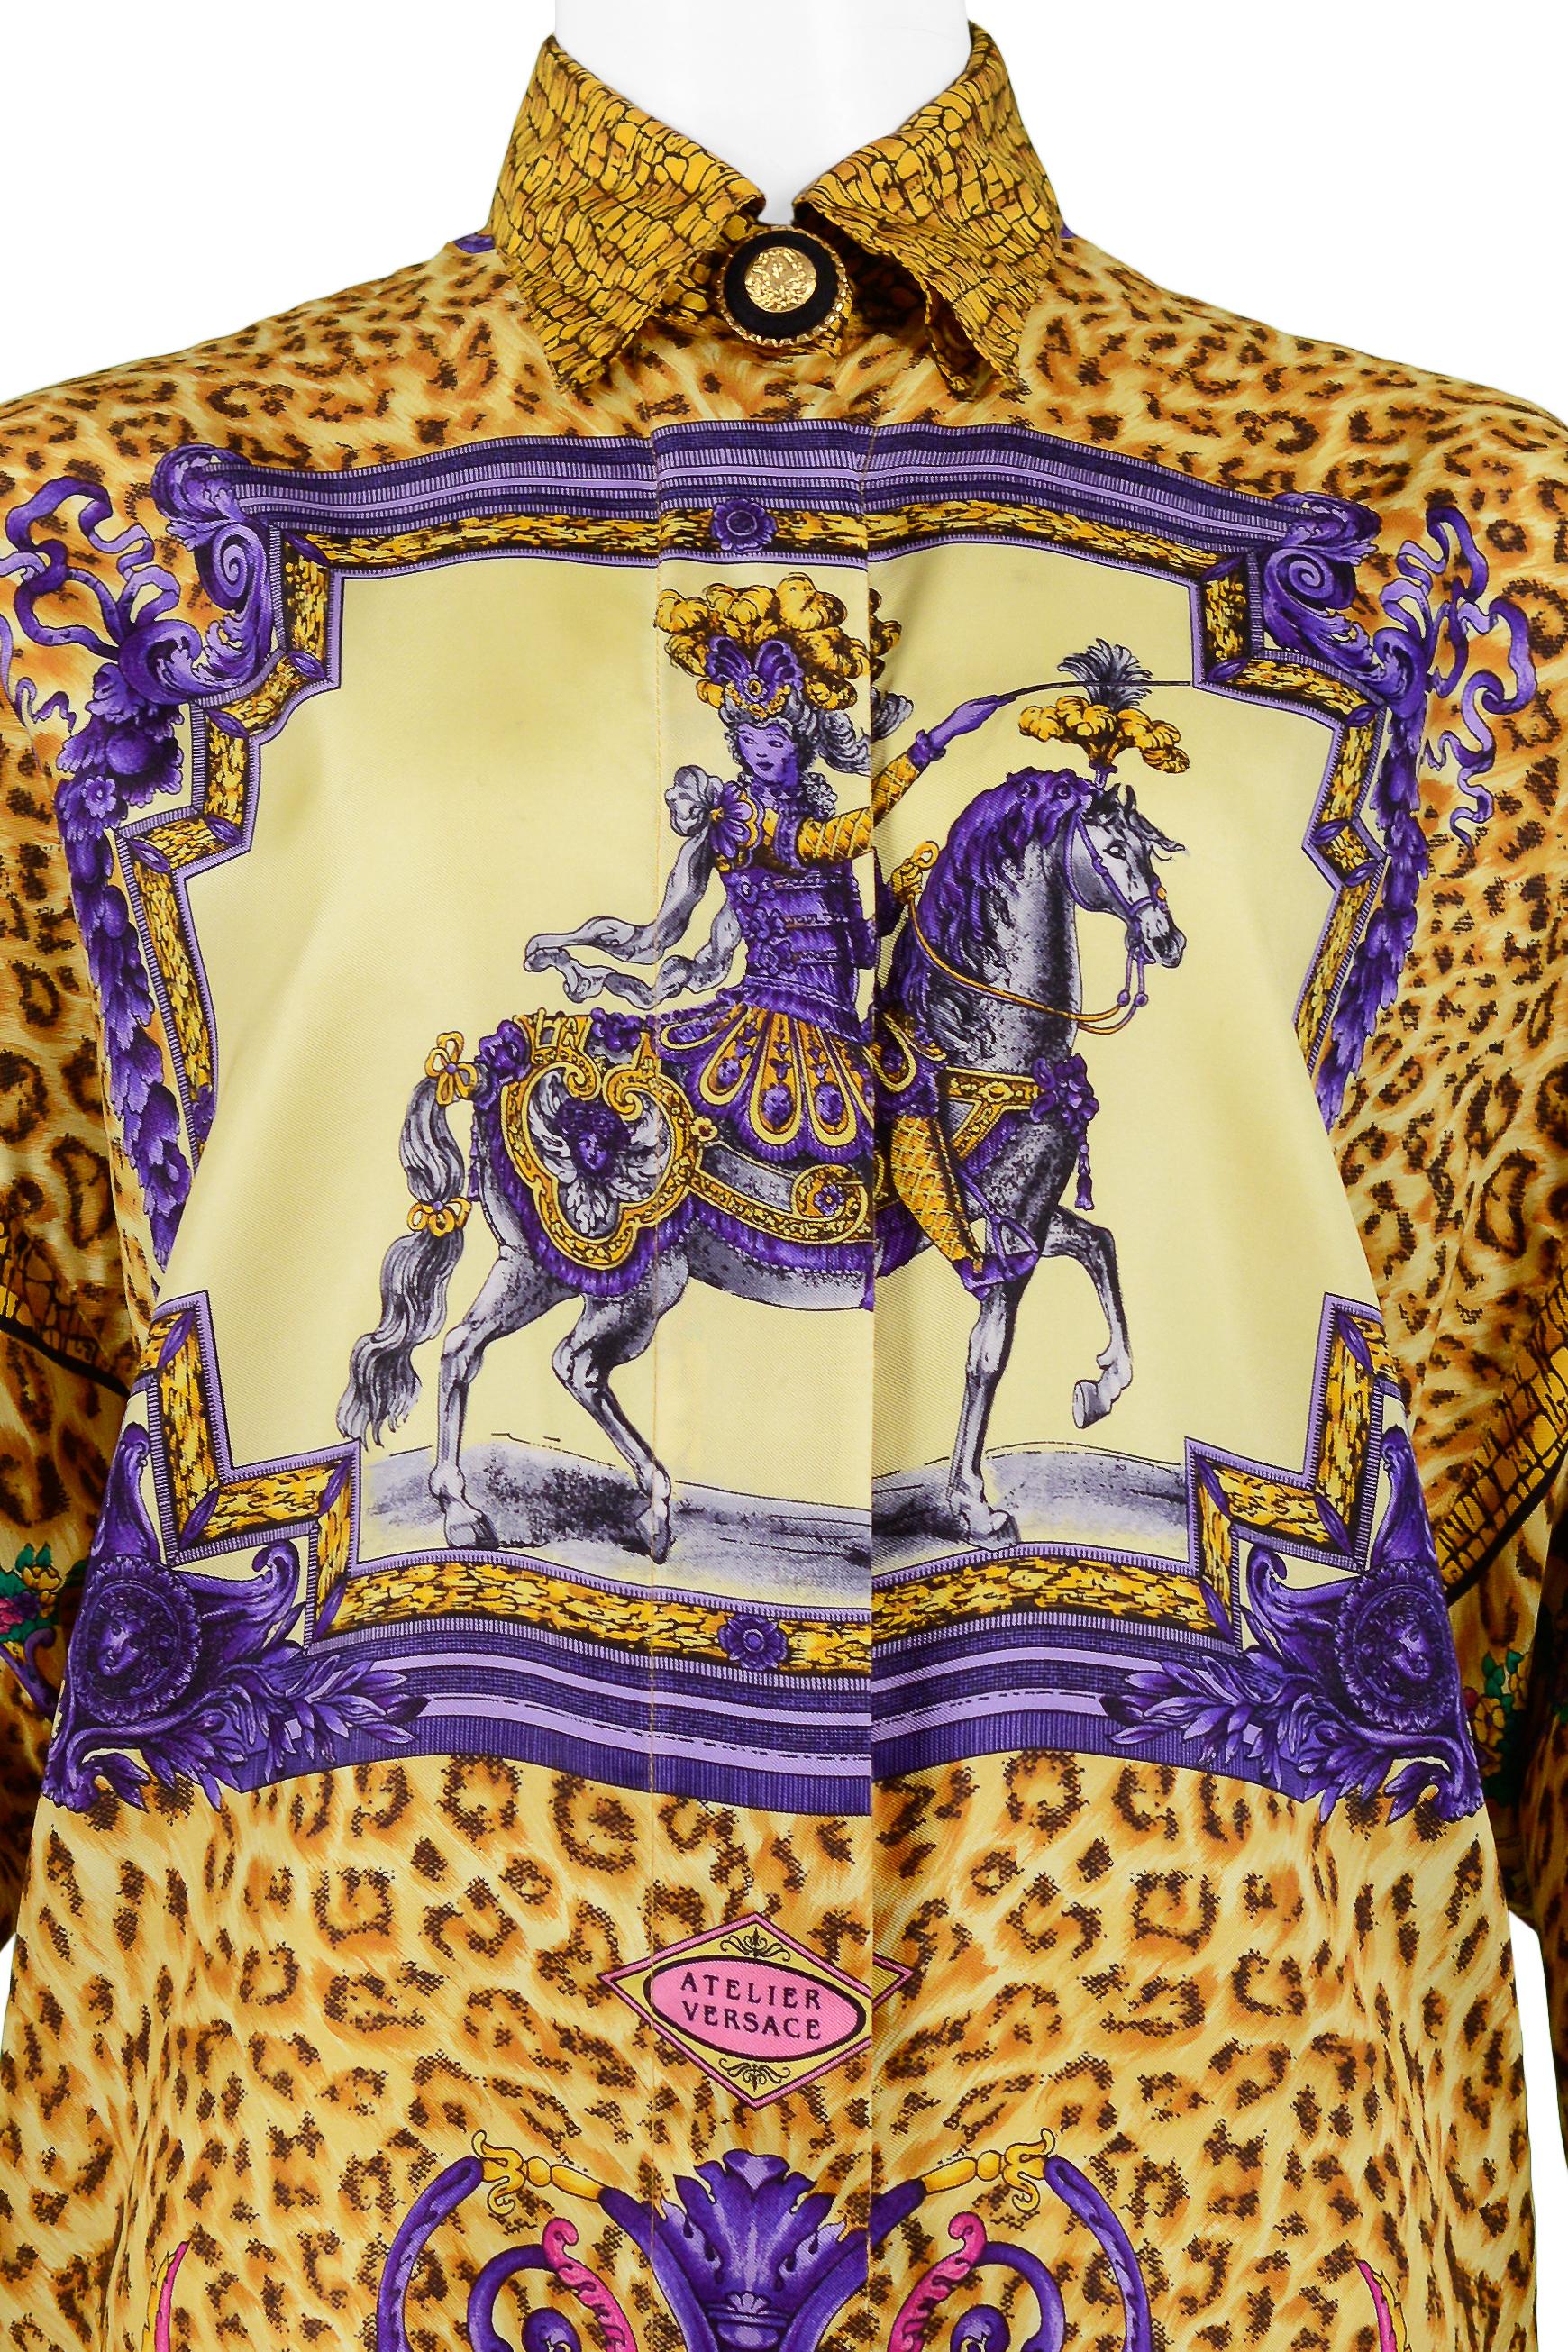 Resurrection is excited to offer a vintage Gianni Versace Couture silk oversized scarf blouse featuring a flap collar, decorative black and gold Medusa buttons, a front placket with hidden buttons, long sleeves, contrasting border print, and an